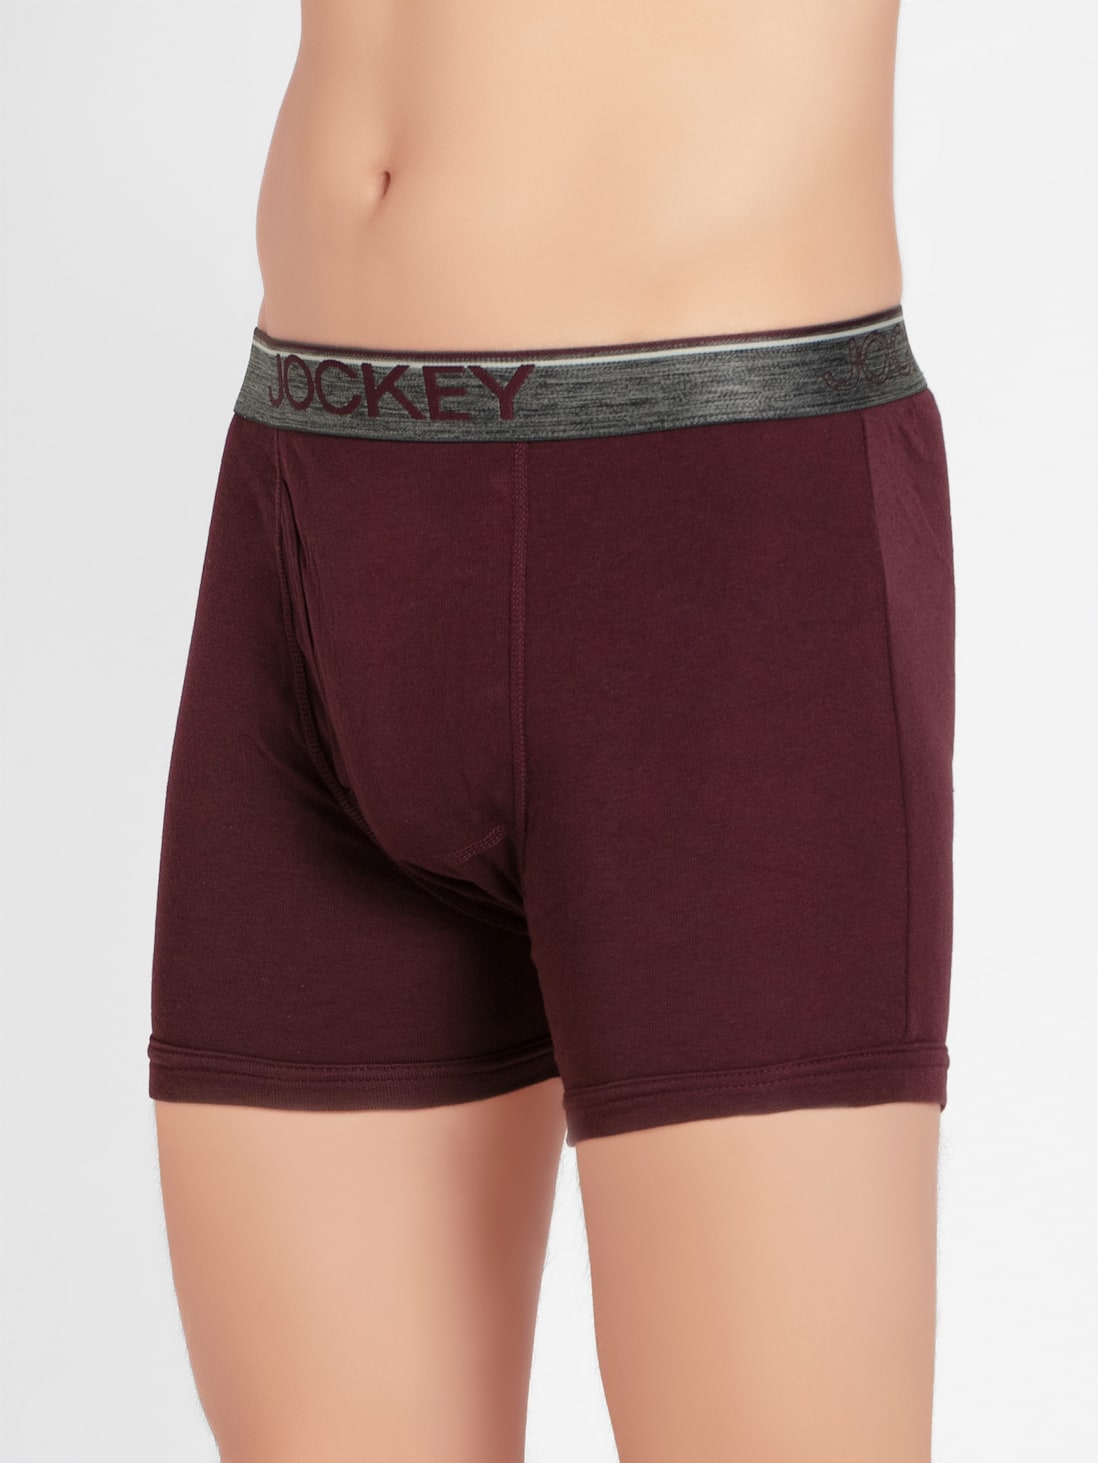 Wine Tasting Boxer Briefs With Front Fly And Exposed Waistband For Men 8009 Jockey India 3869